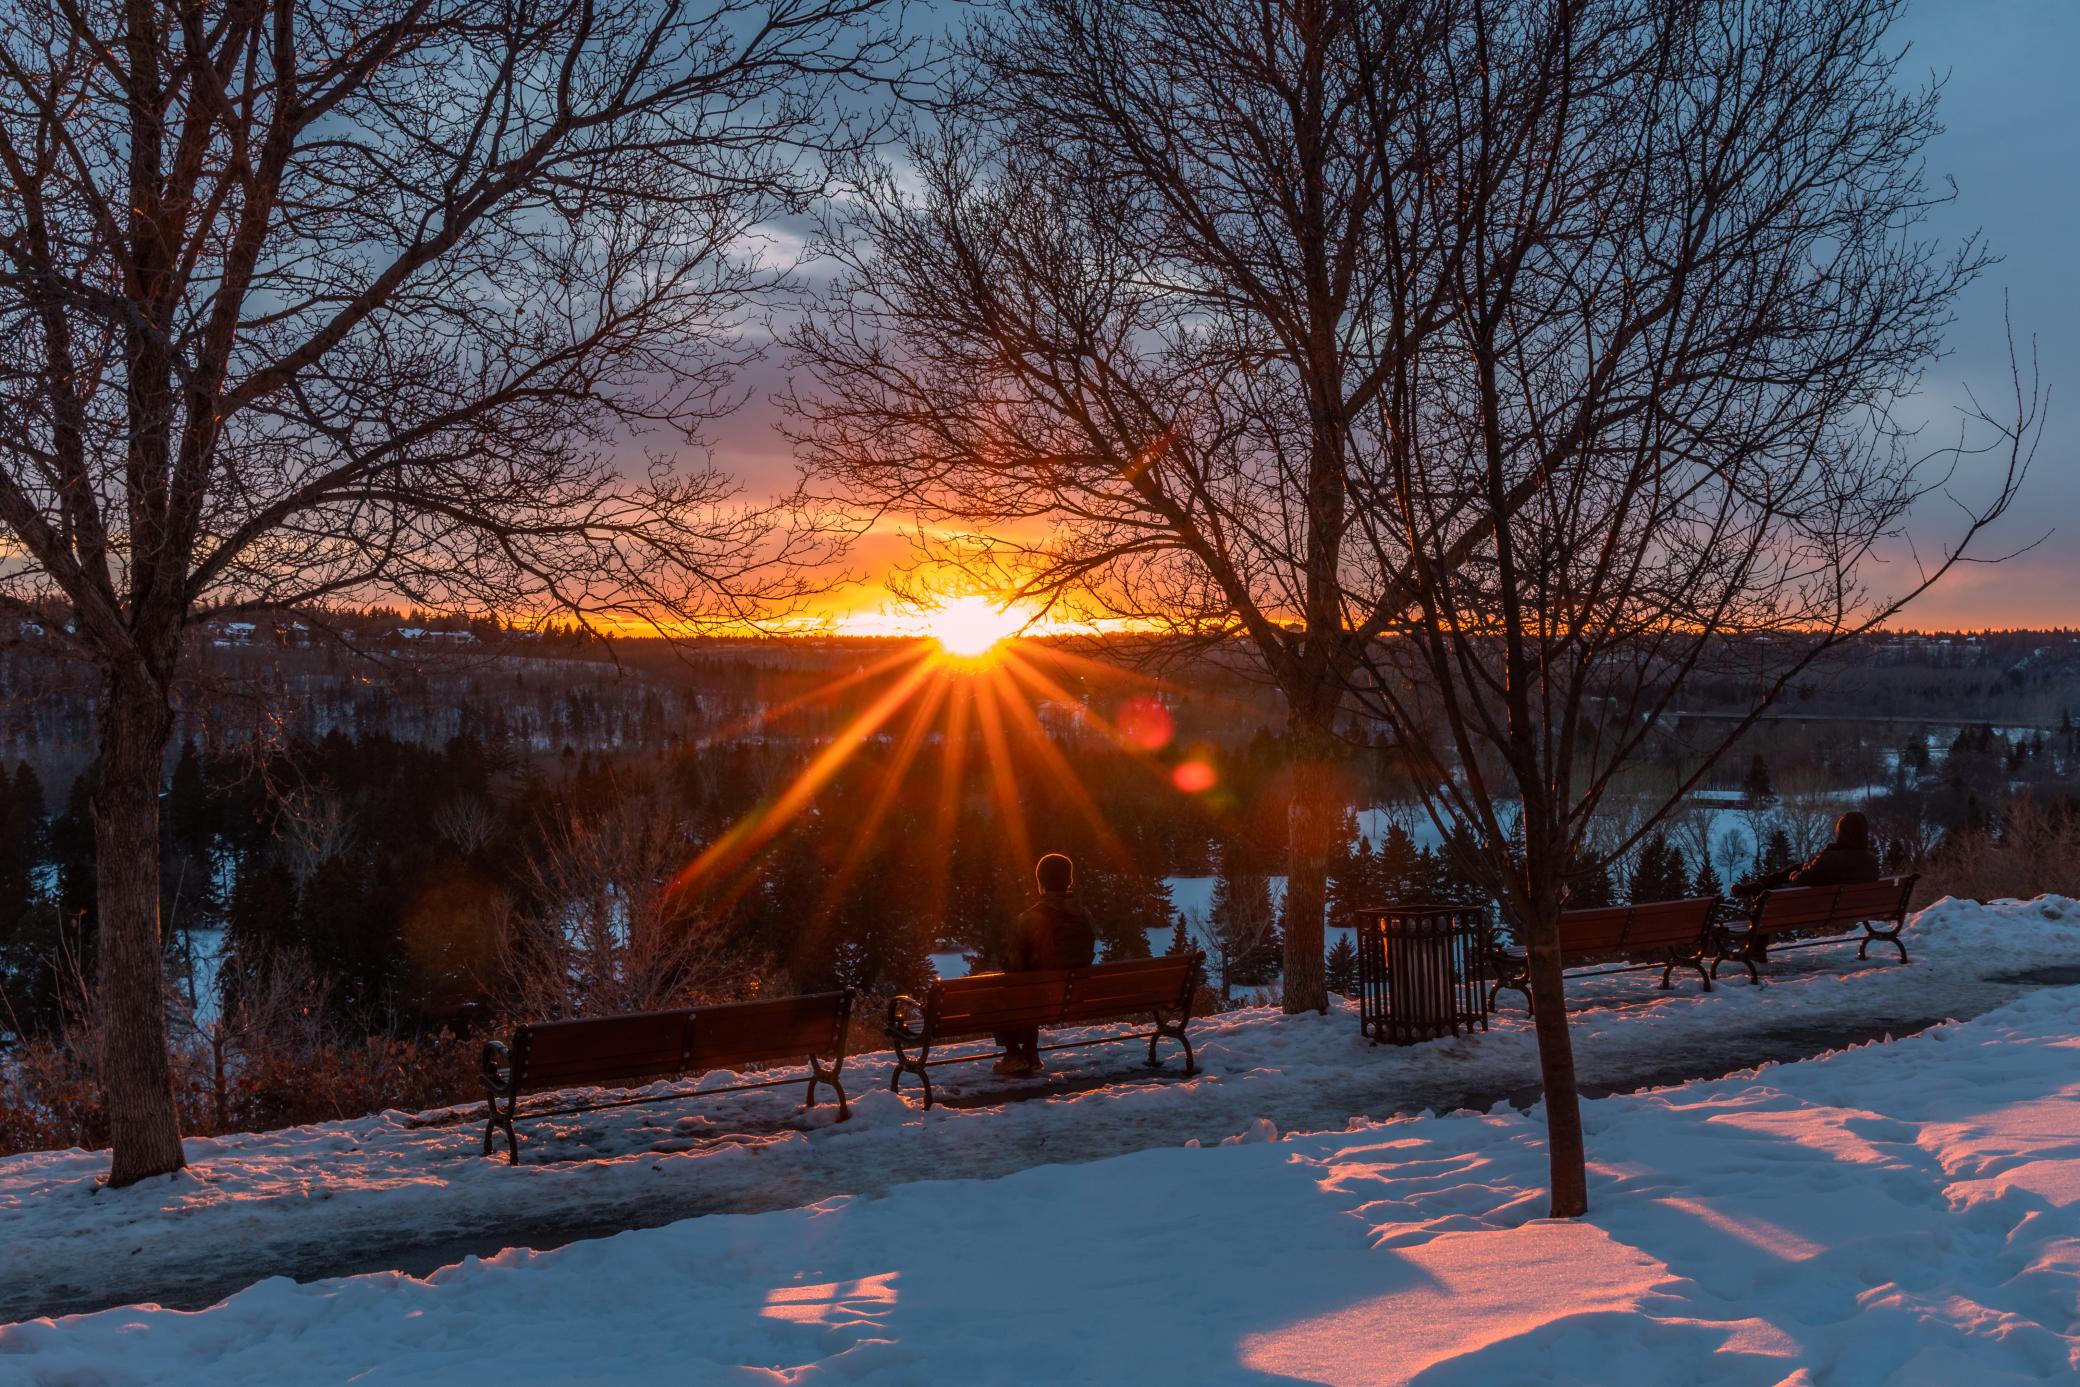 the winter sunset at the victoria promenade overlook in the Oliver neighbourhood looking down the river valley